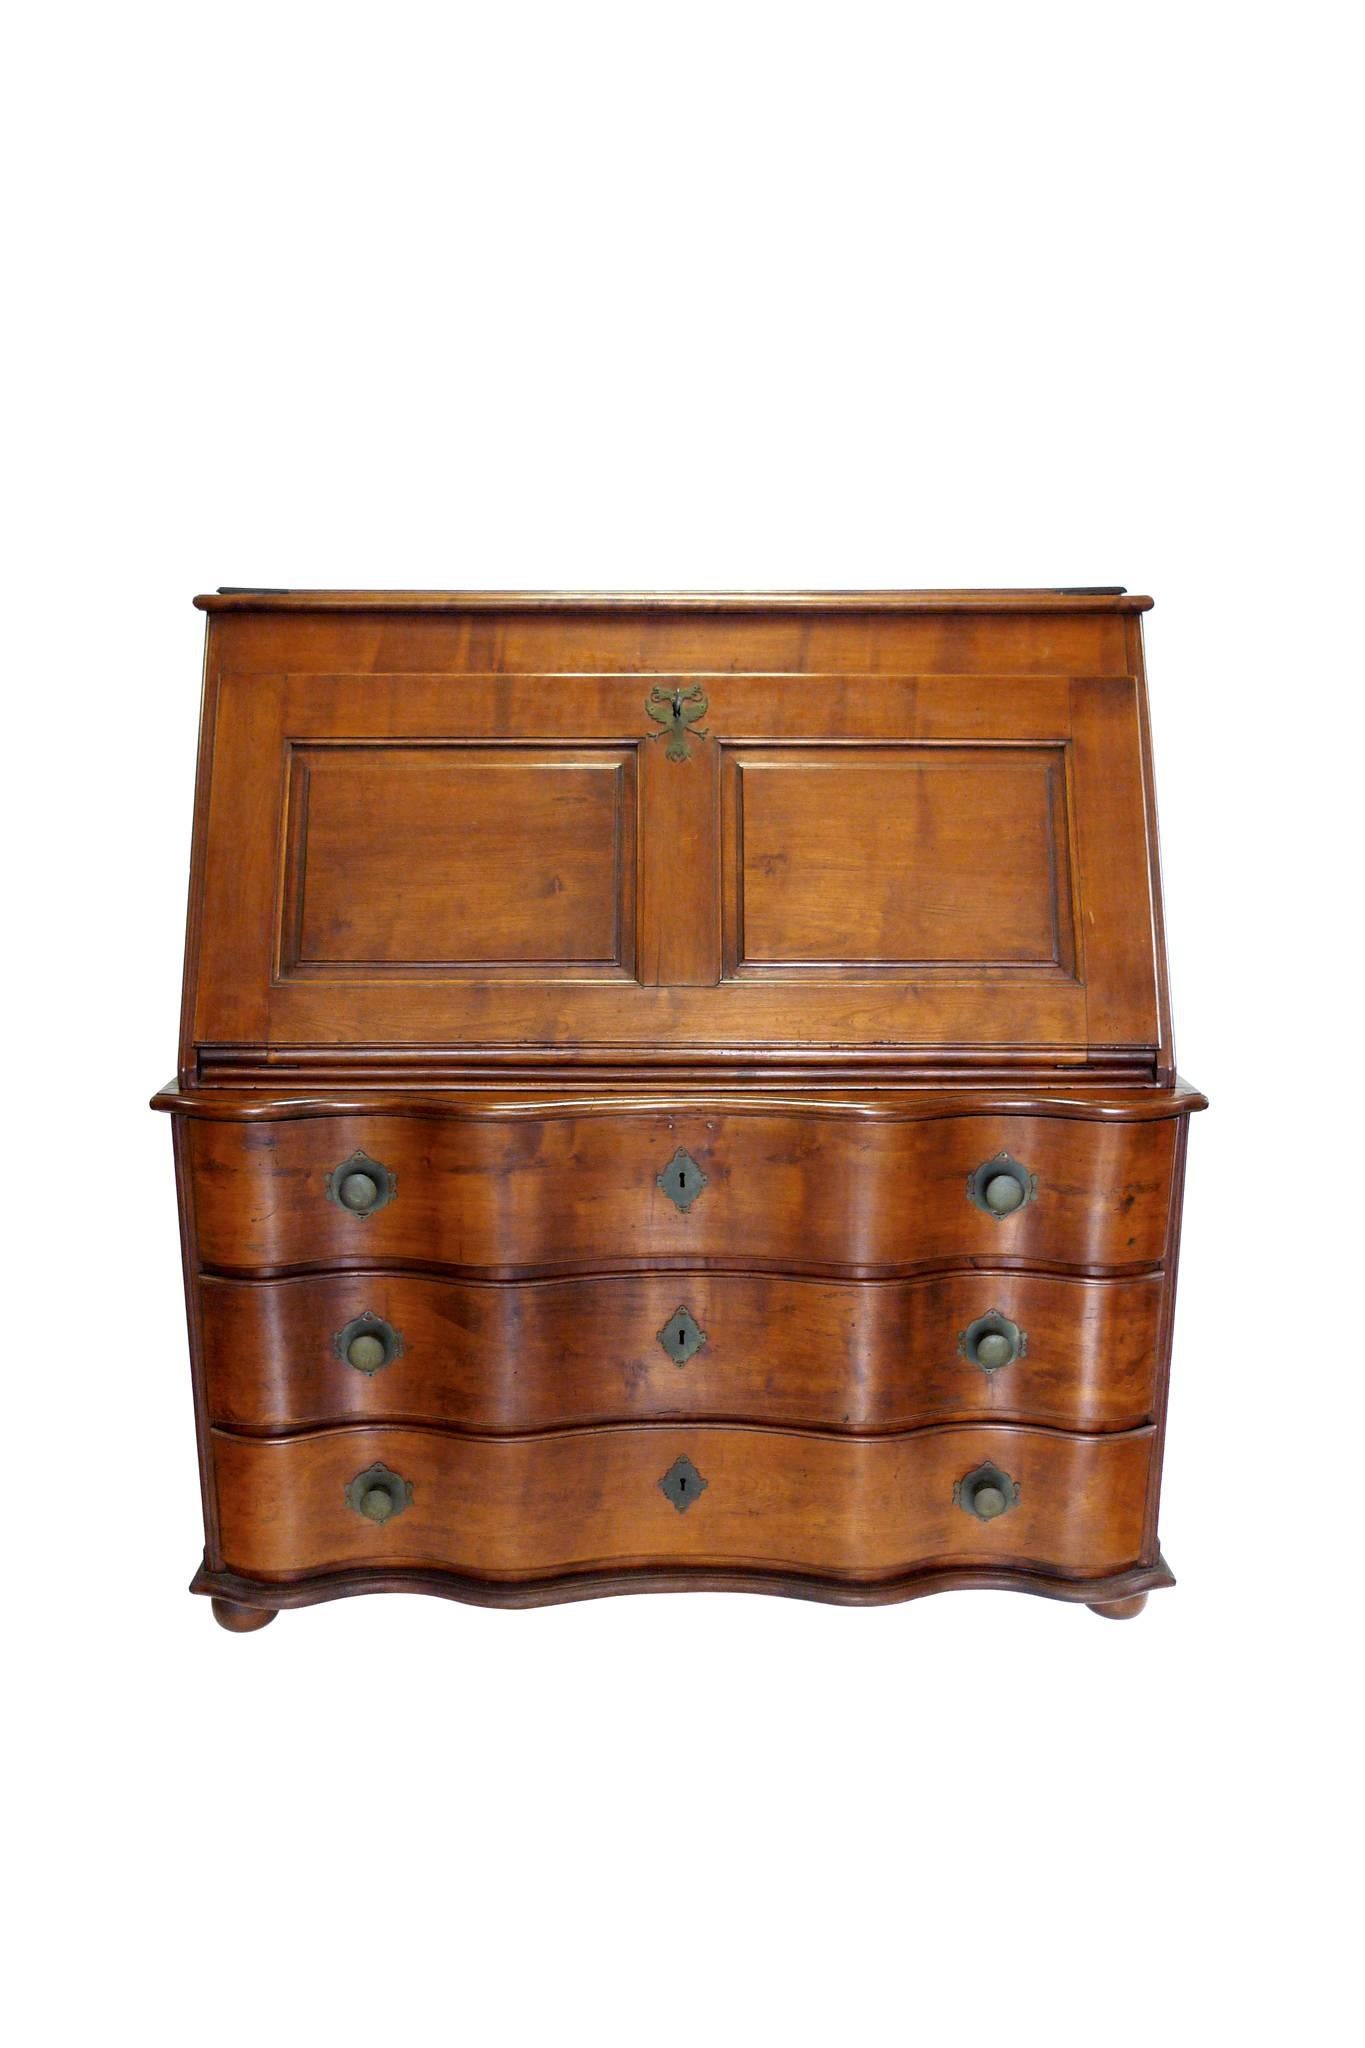 This 19th Century Swiss case piece is comprised of a drop-leaf desktop and a chest of drawers. They are a combination of cherry and pine wood. The brass hardware is original and includes a pair of keys. It's a sturdy, solid piece with ample storage